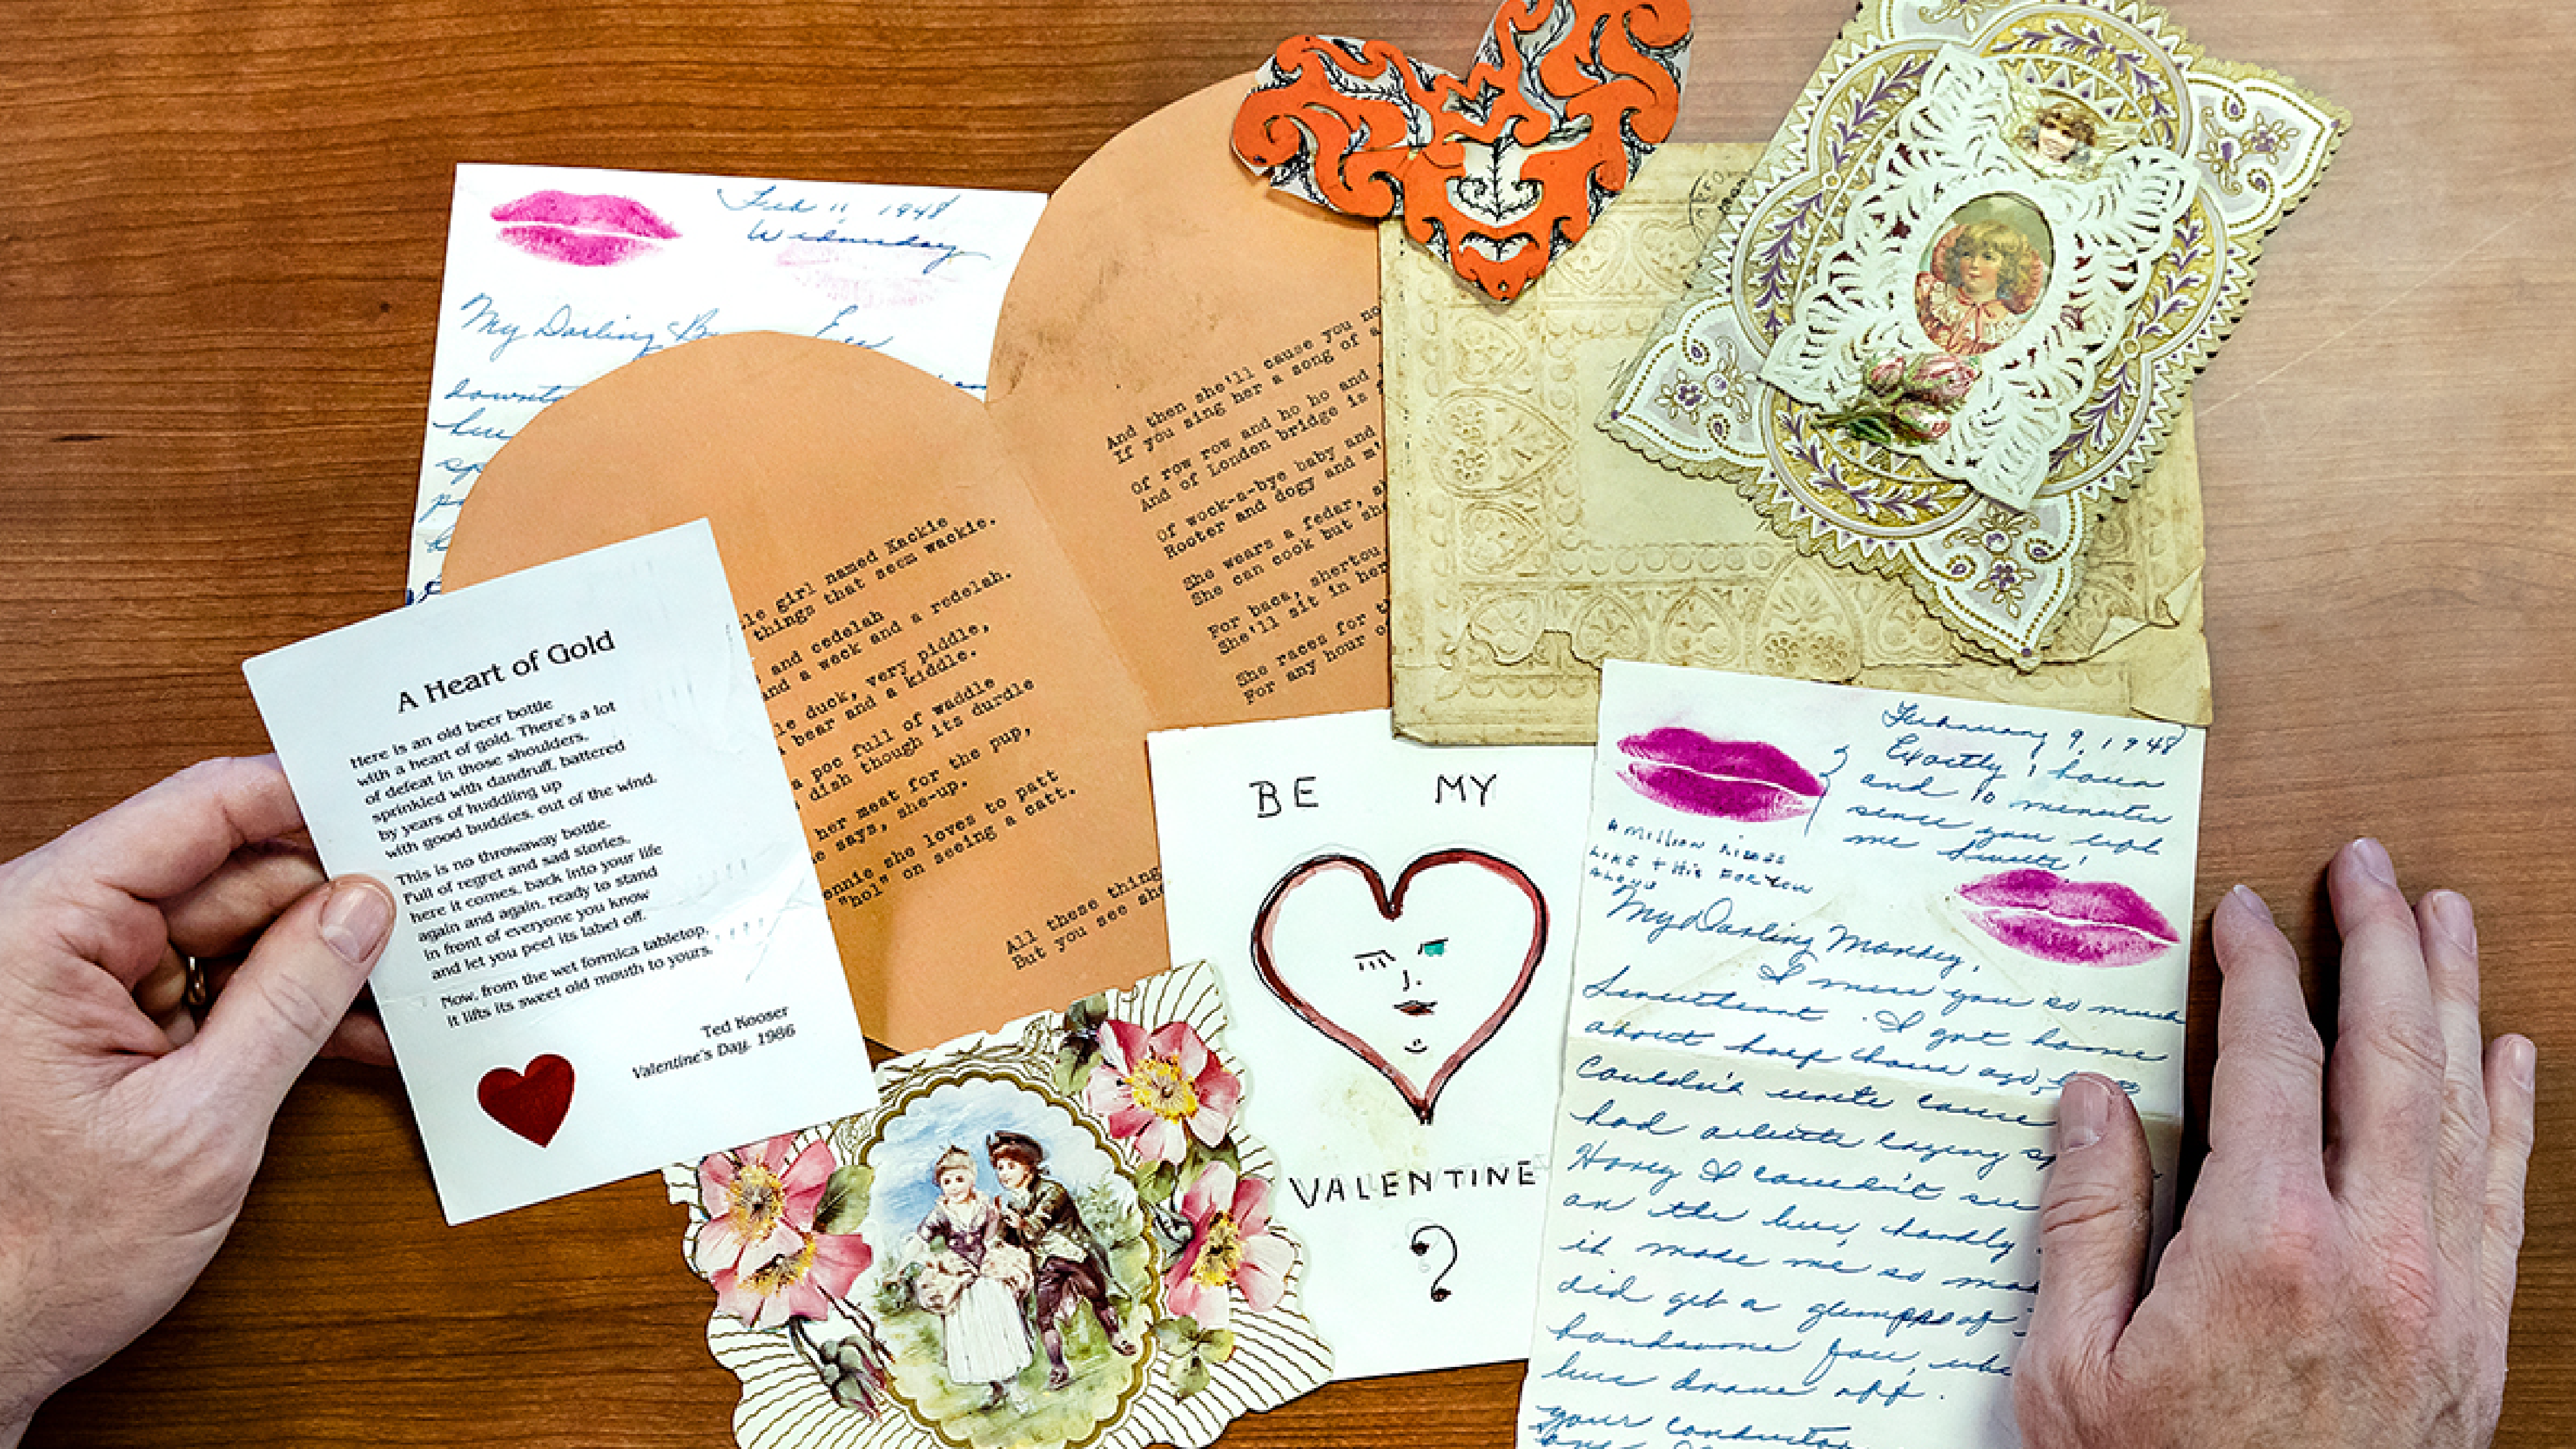 Love letters from the past